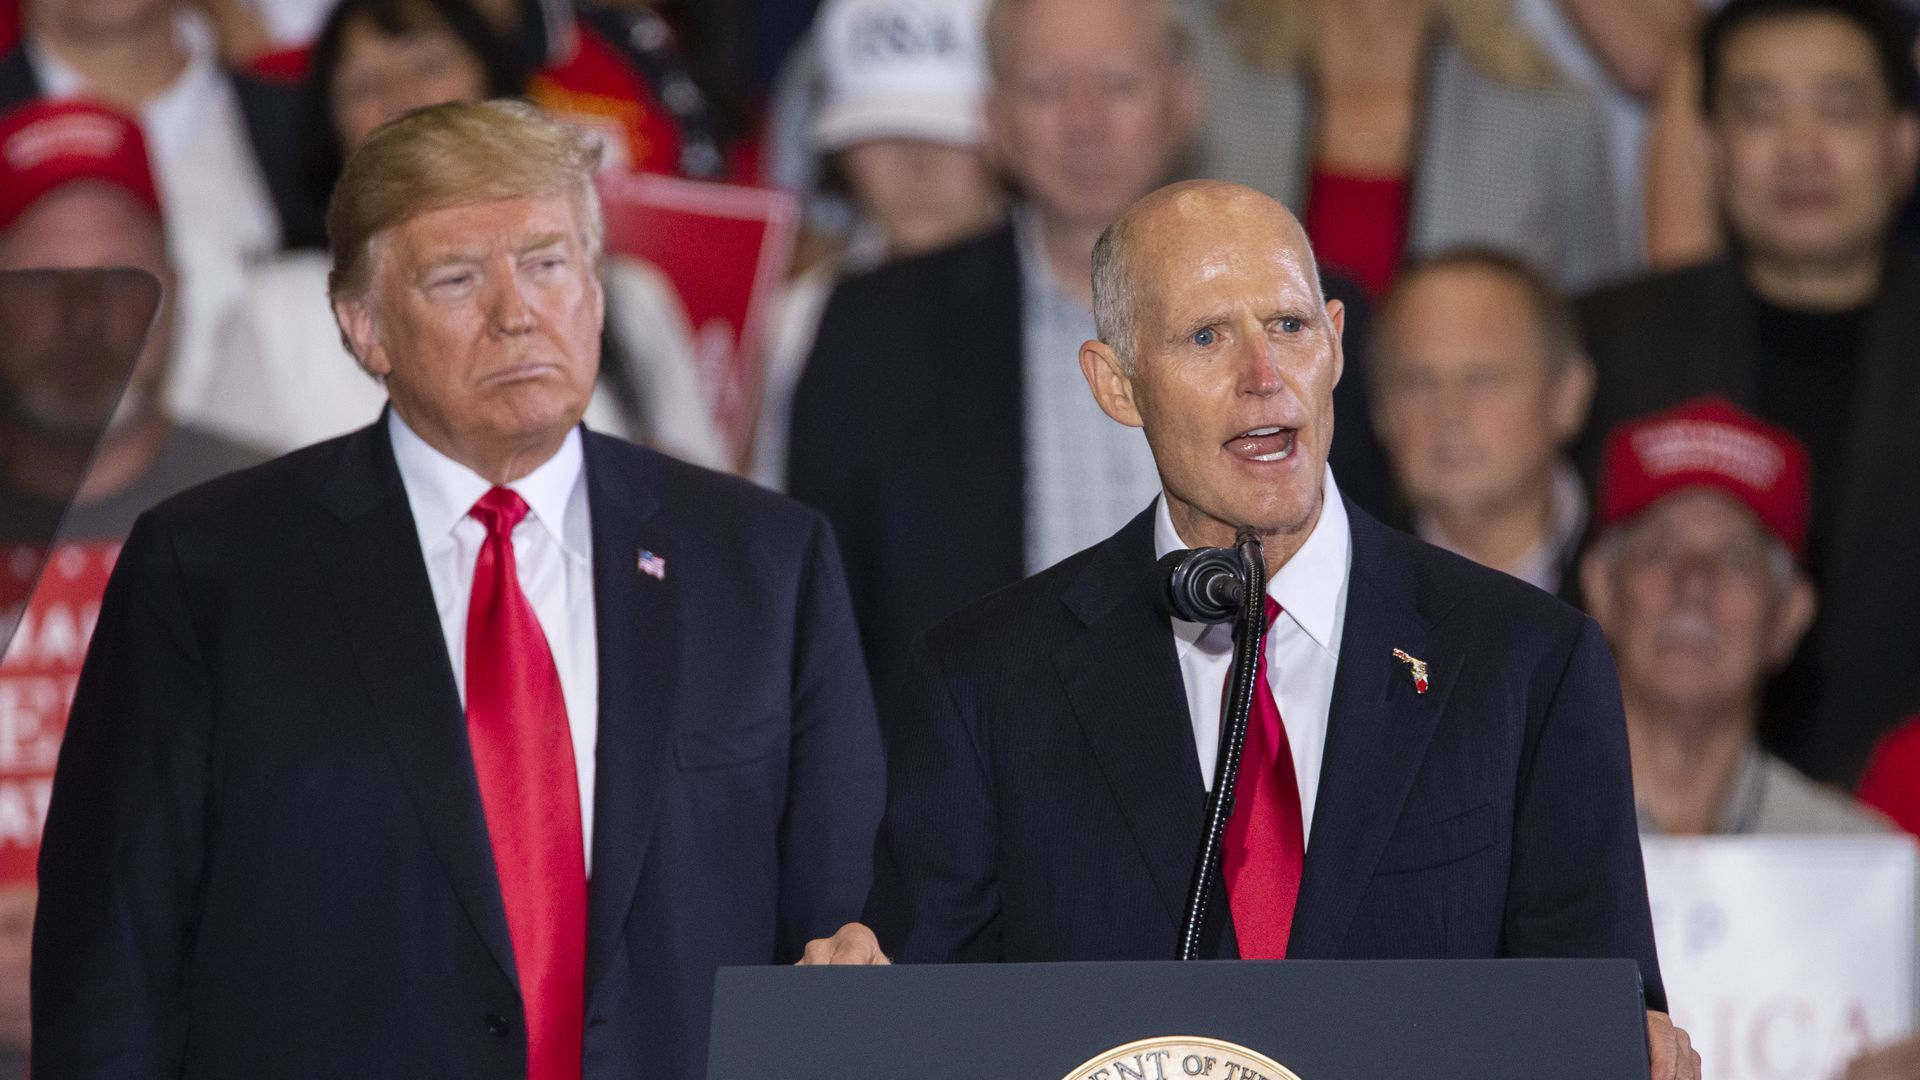 President Trump stands with Rick Scott at a campaign rally